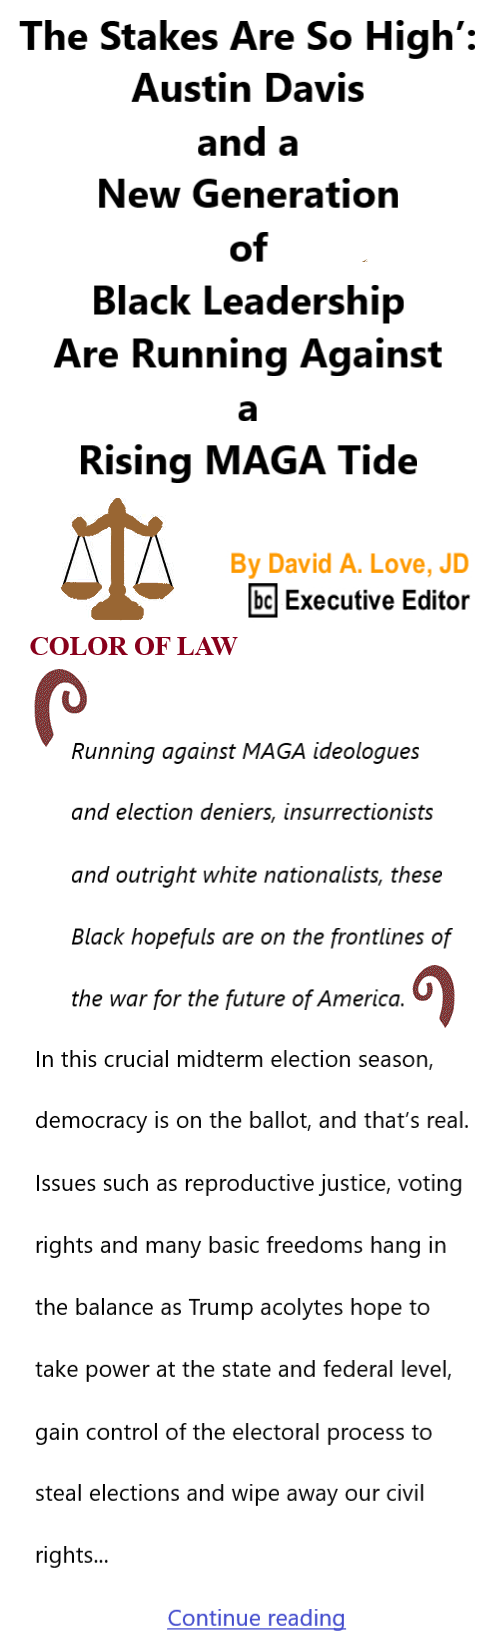 BlackCommentator.com Sept 22, 2022 - Issue 924: The Stakes Are So High’: Austin Davis and a New Generation of Black Leadership Are Running Against a Rising MAGA Tide - Color of Law By David A. Love, JD, BC Executive Editor